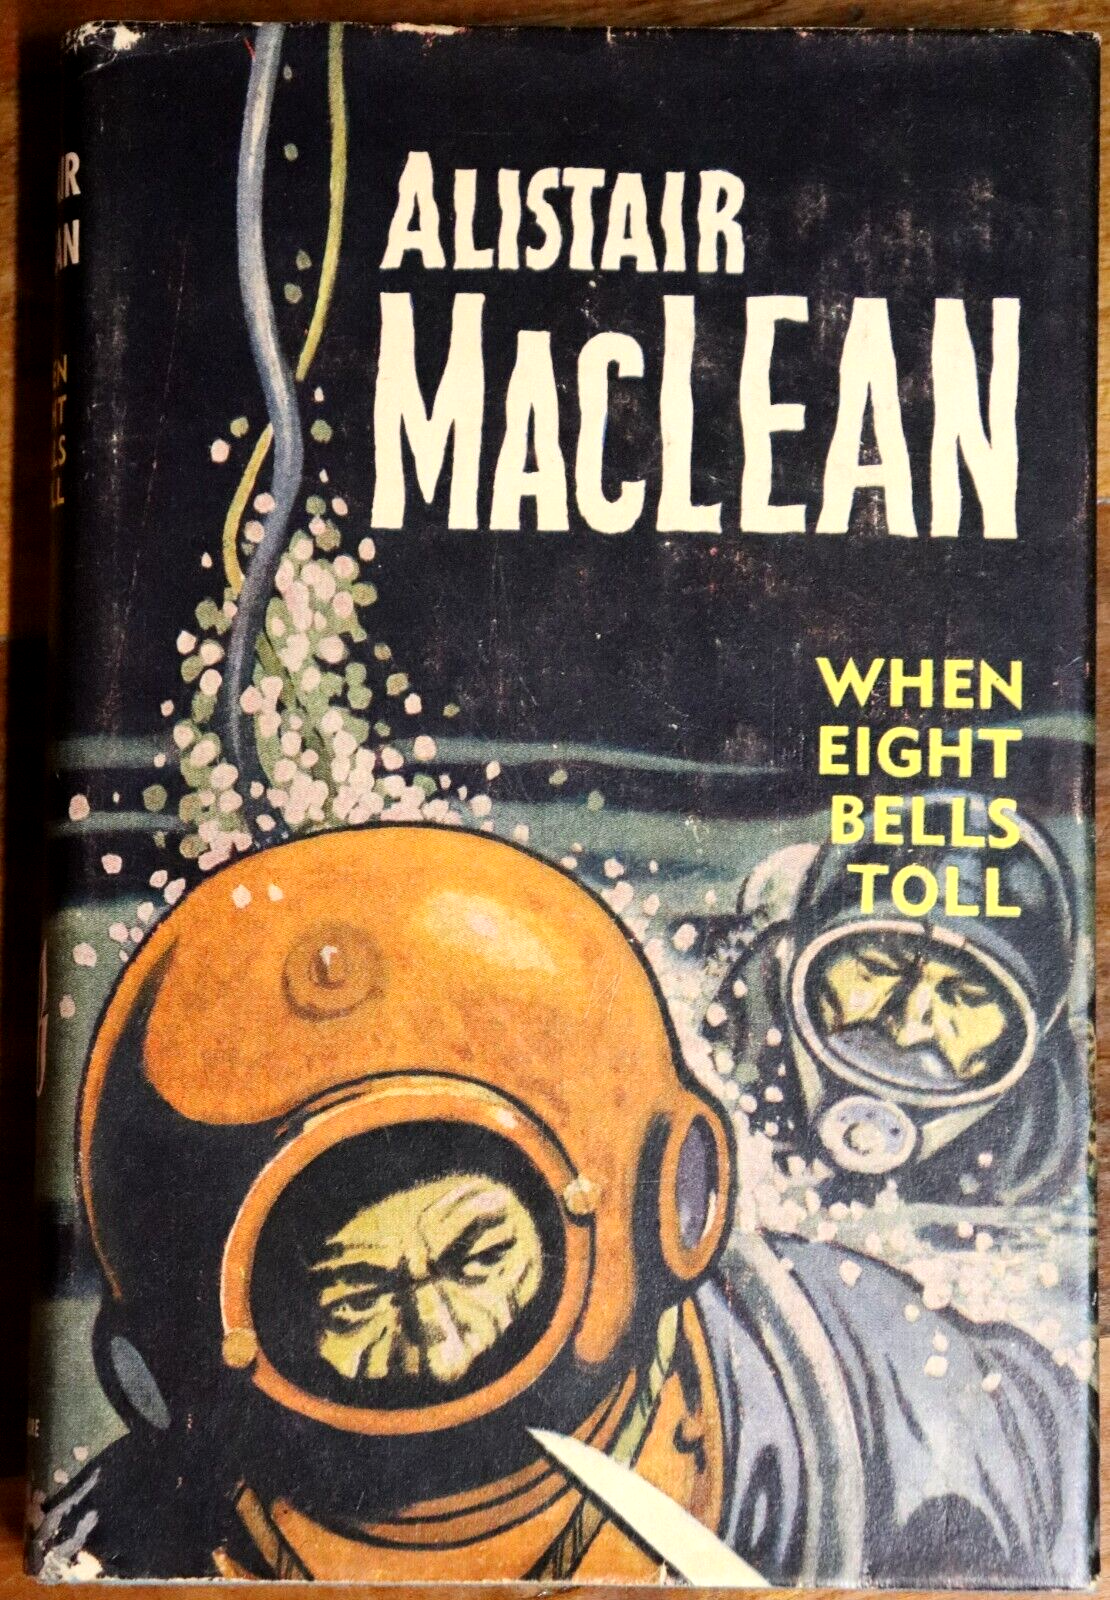 When Eight Bells Toll by Alistair MacLean - c1966 - Vintage Fiction Book